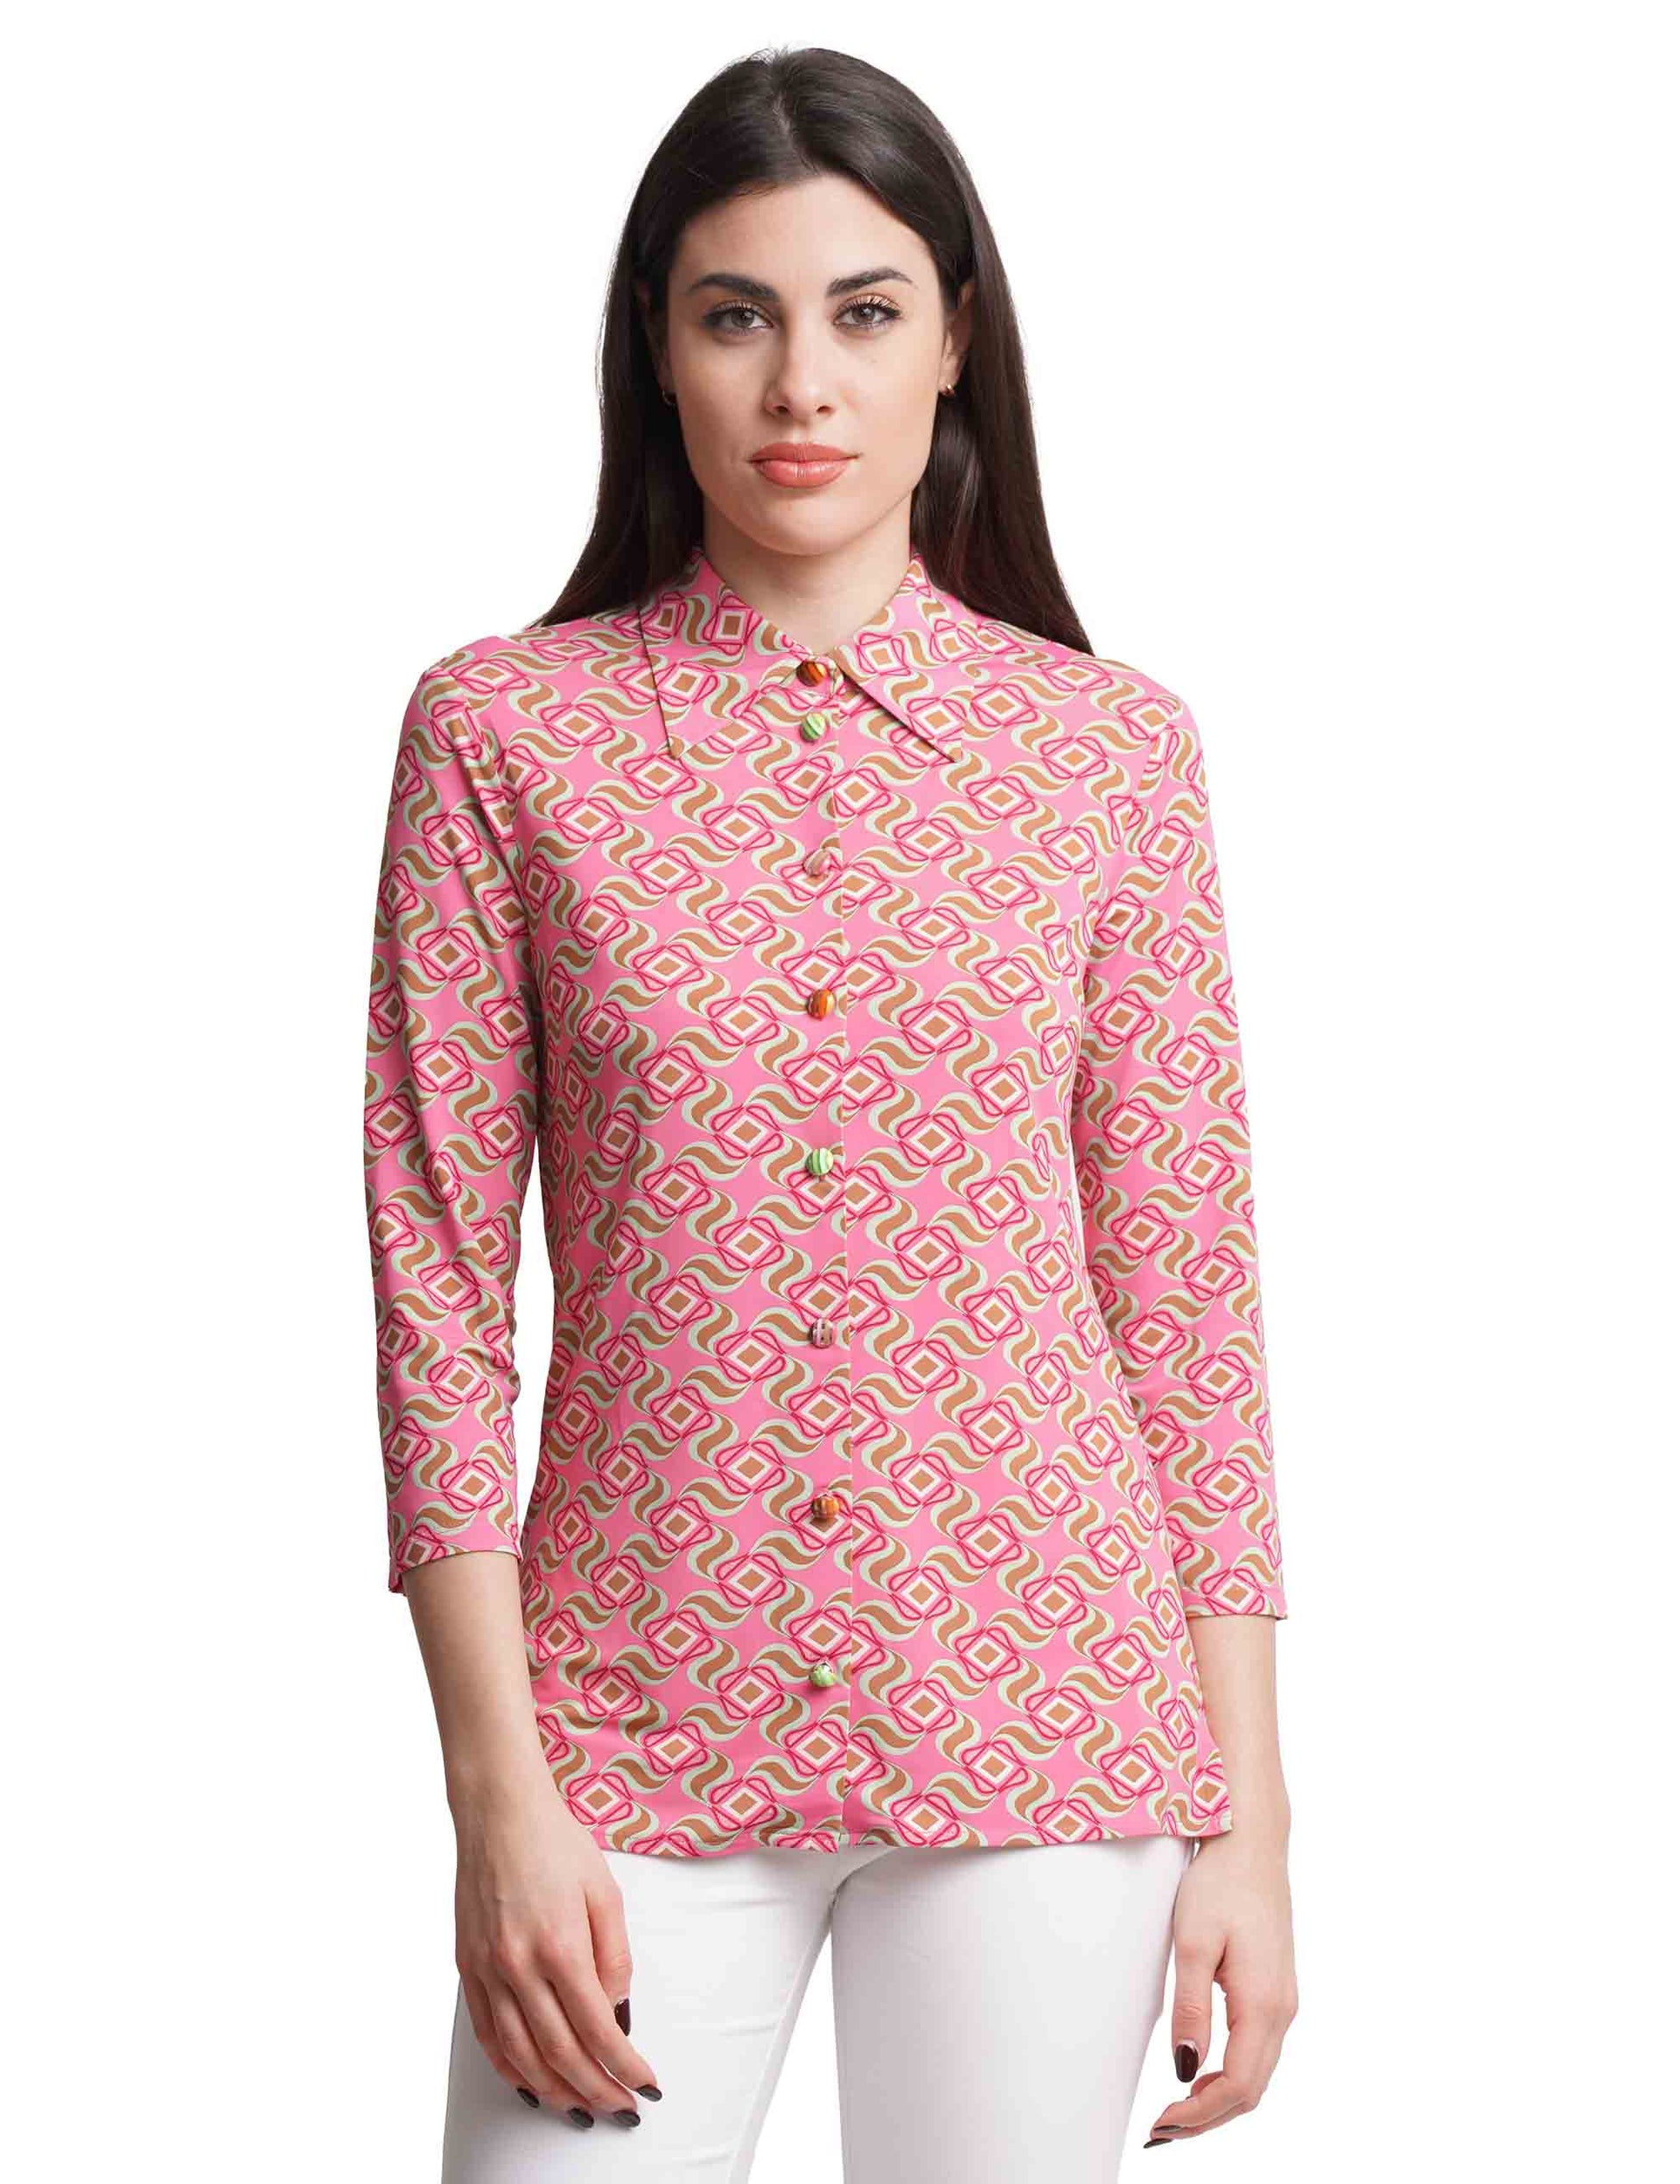 Women's Swirl Print shirts in pink jersey with 3/4 sleeves